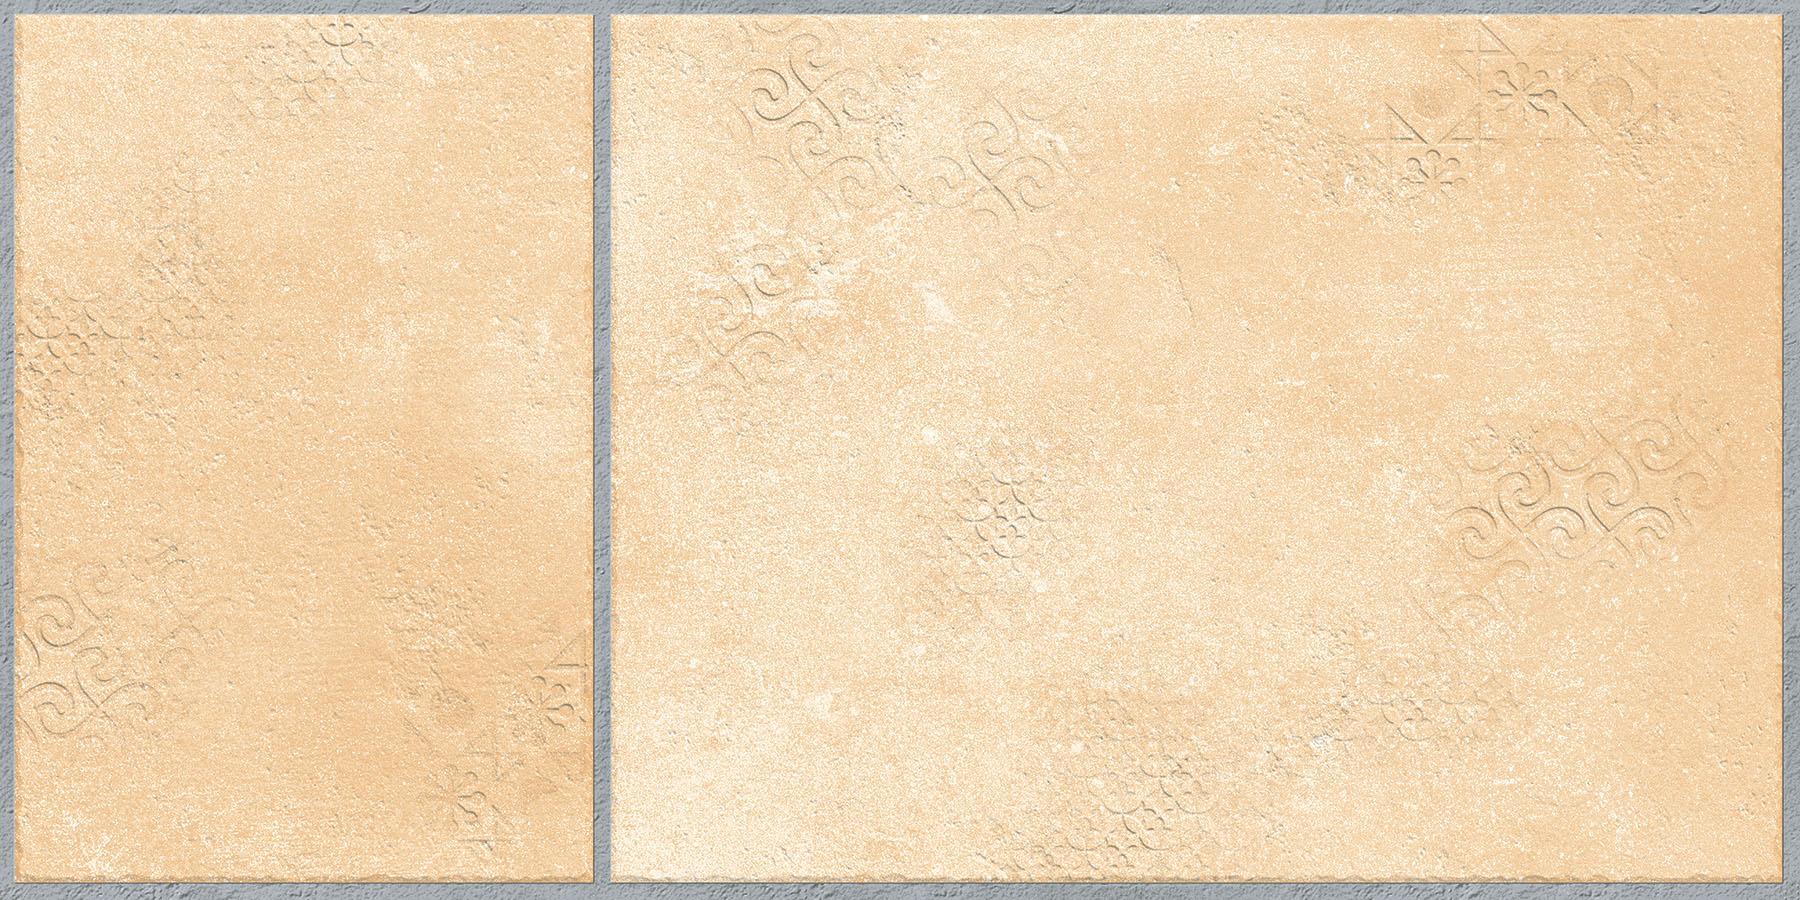 Accent Tiles for Bathroom Tiles, Living Room Tiles, Elevation Tiles, Accent Tiles, Hospital Tiles, High Traffic Tiles, Bar/Restaurant, Commercial/Office, Outdoor Area, School & Collages